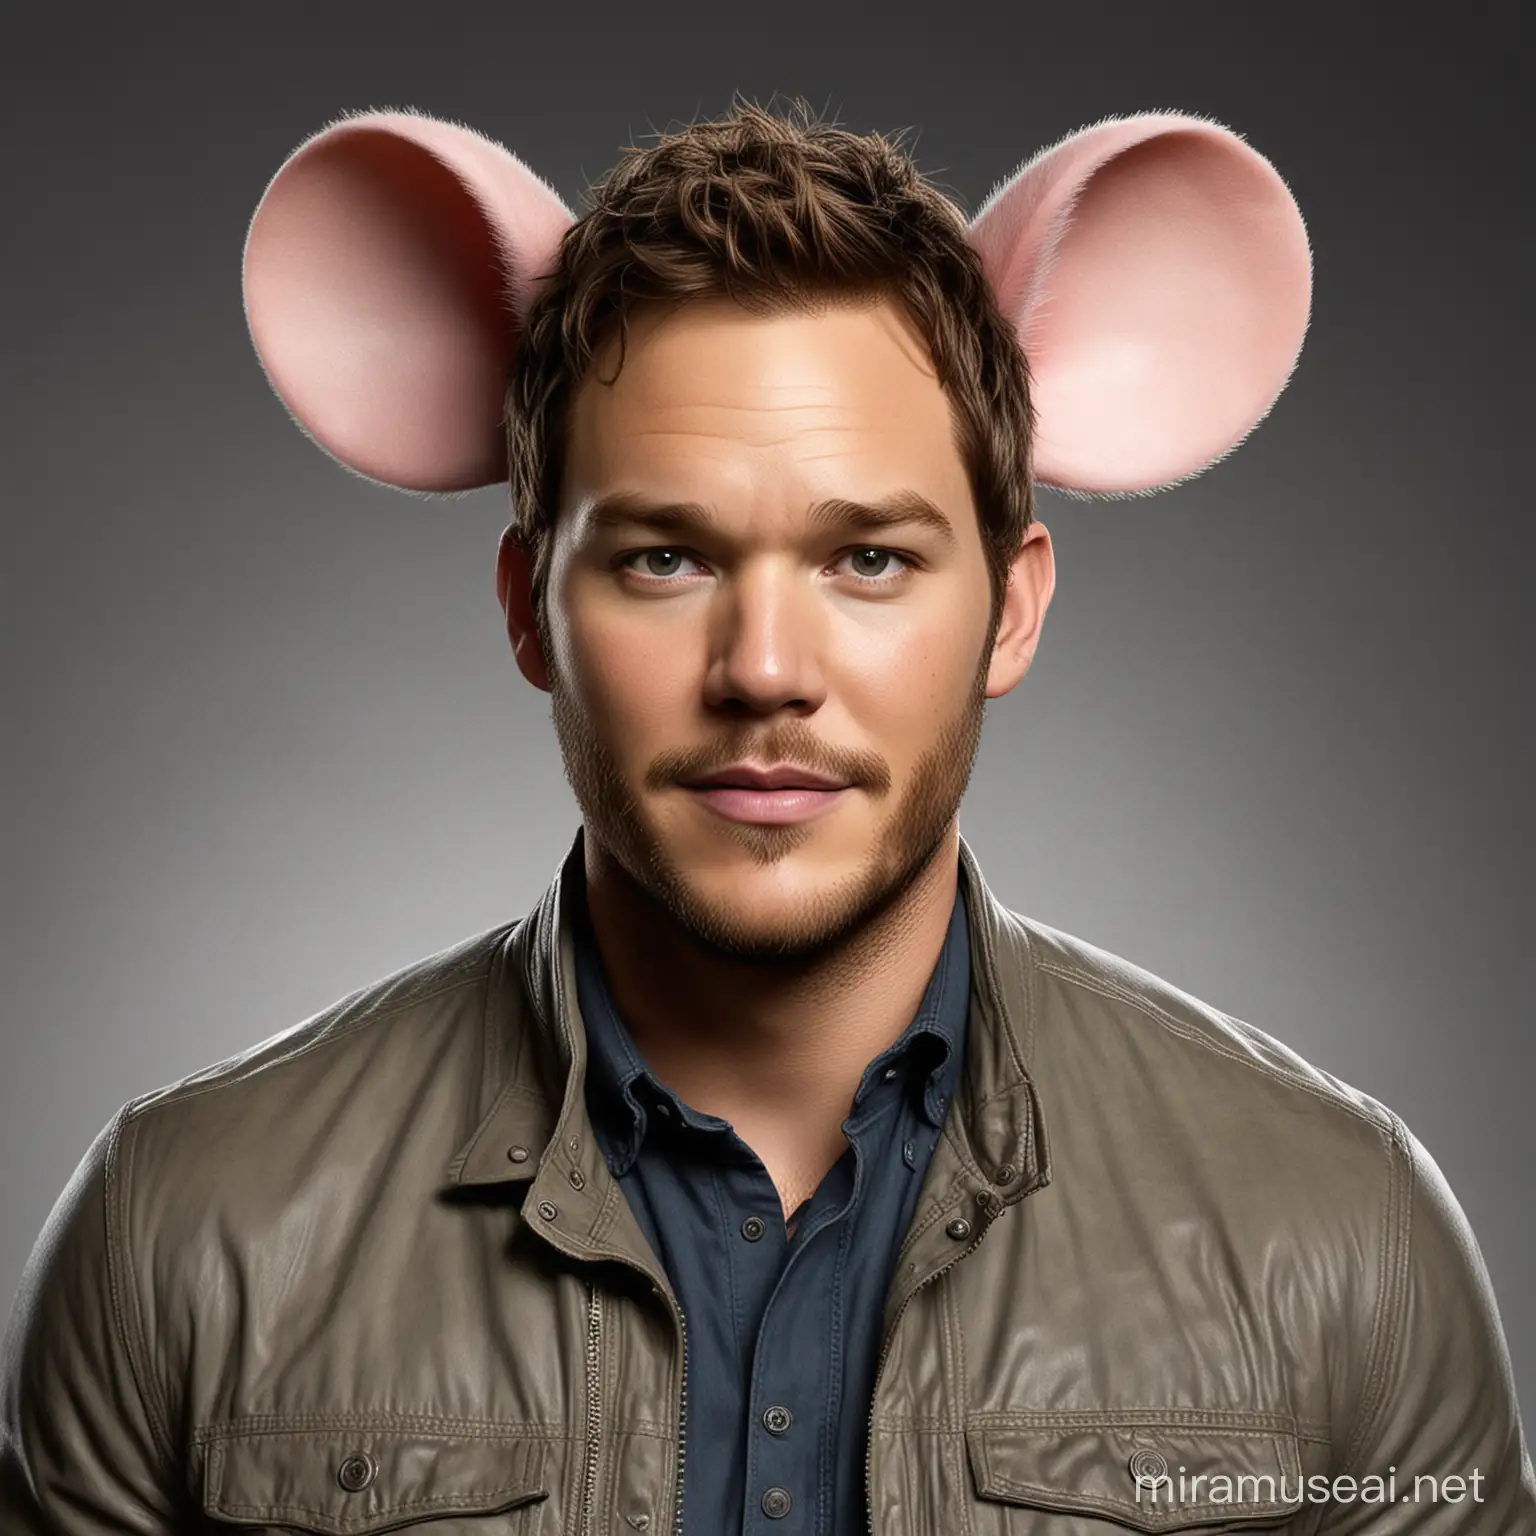 Chris Pratt transforming into a mouse. He has mouse ears. He has mouse whiskers. He has rodent like buck teeth. He has a mouse tail. And he's the size of a mouse.